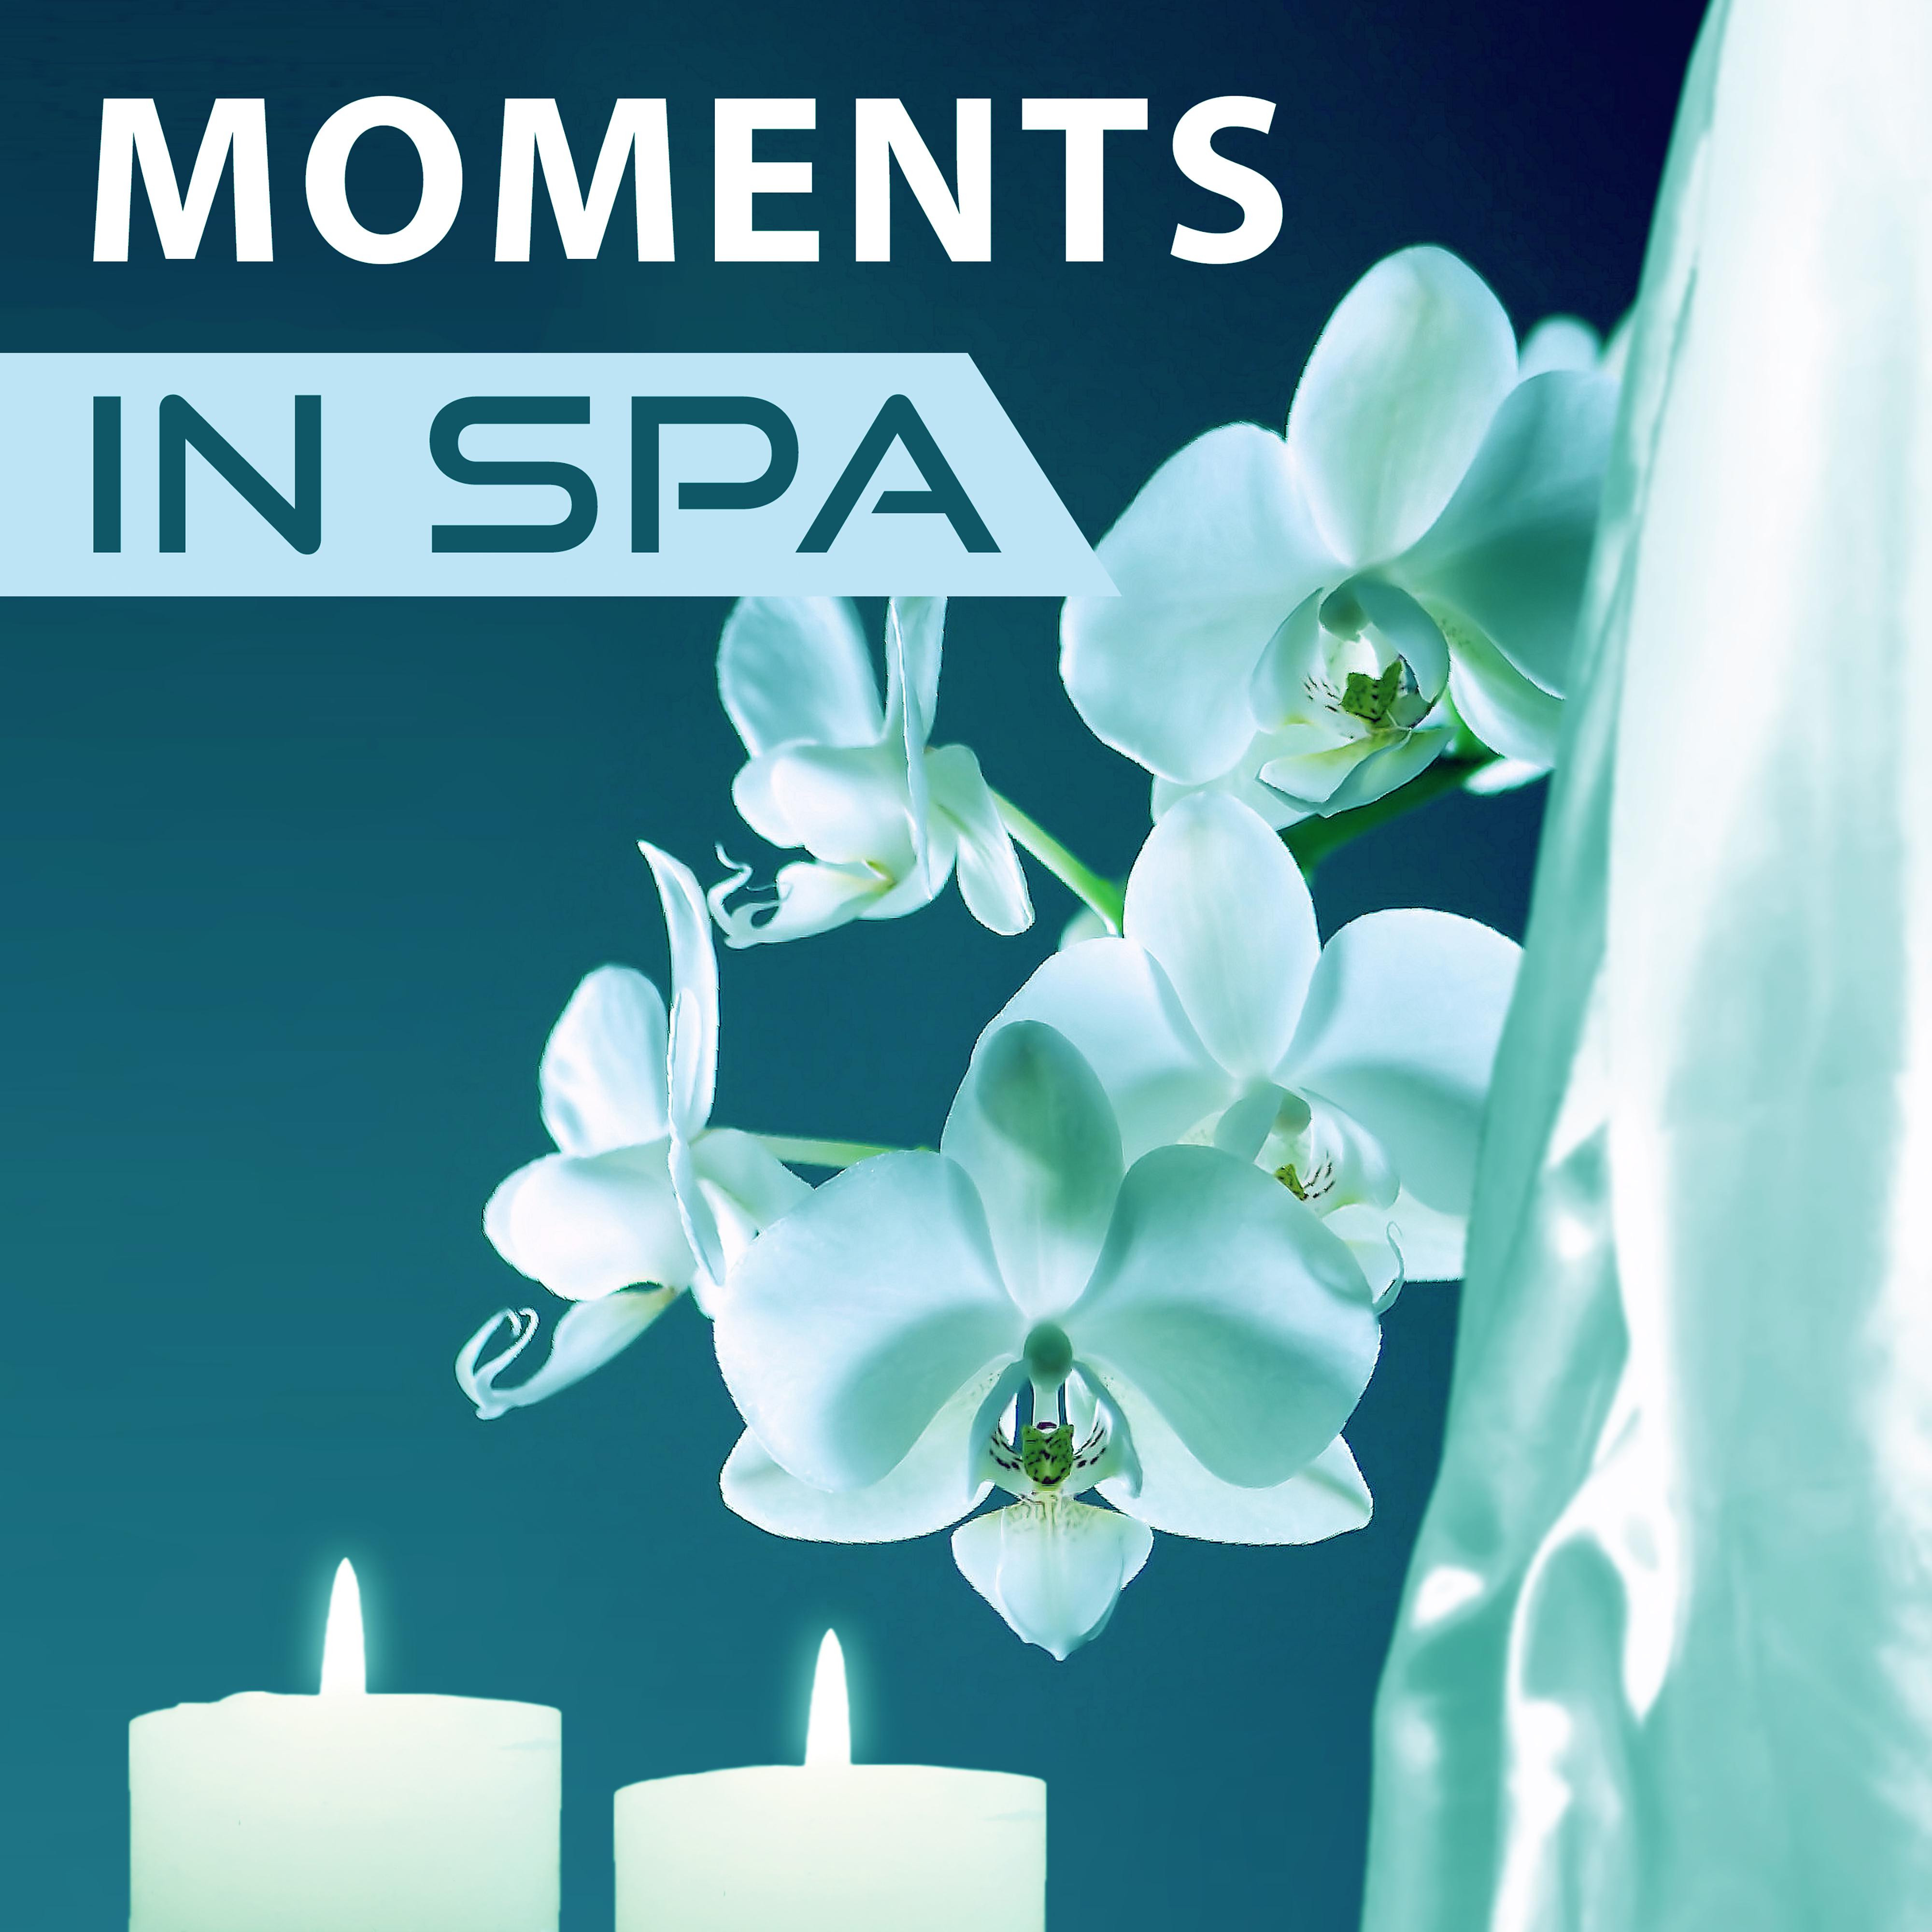 Moments in Spa - Health Treatments, Relaxing Massage, Rest the Peaceful Sounds, Aromatherapy, Herbal Drinks